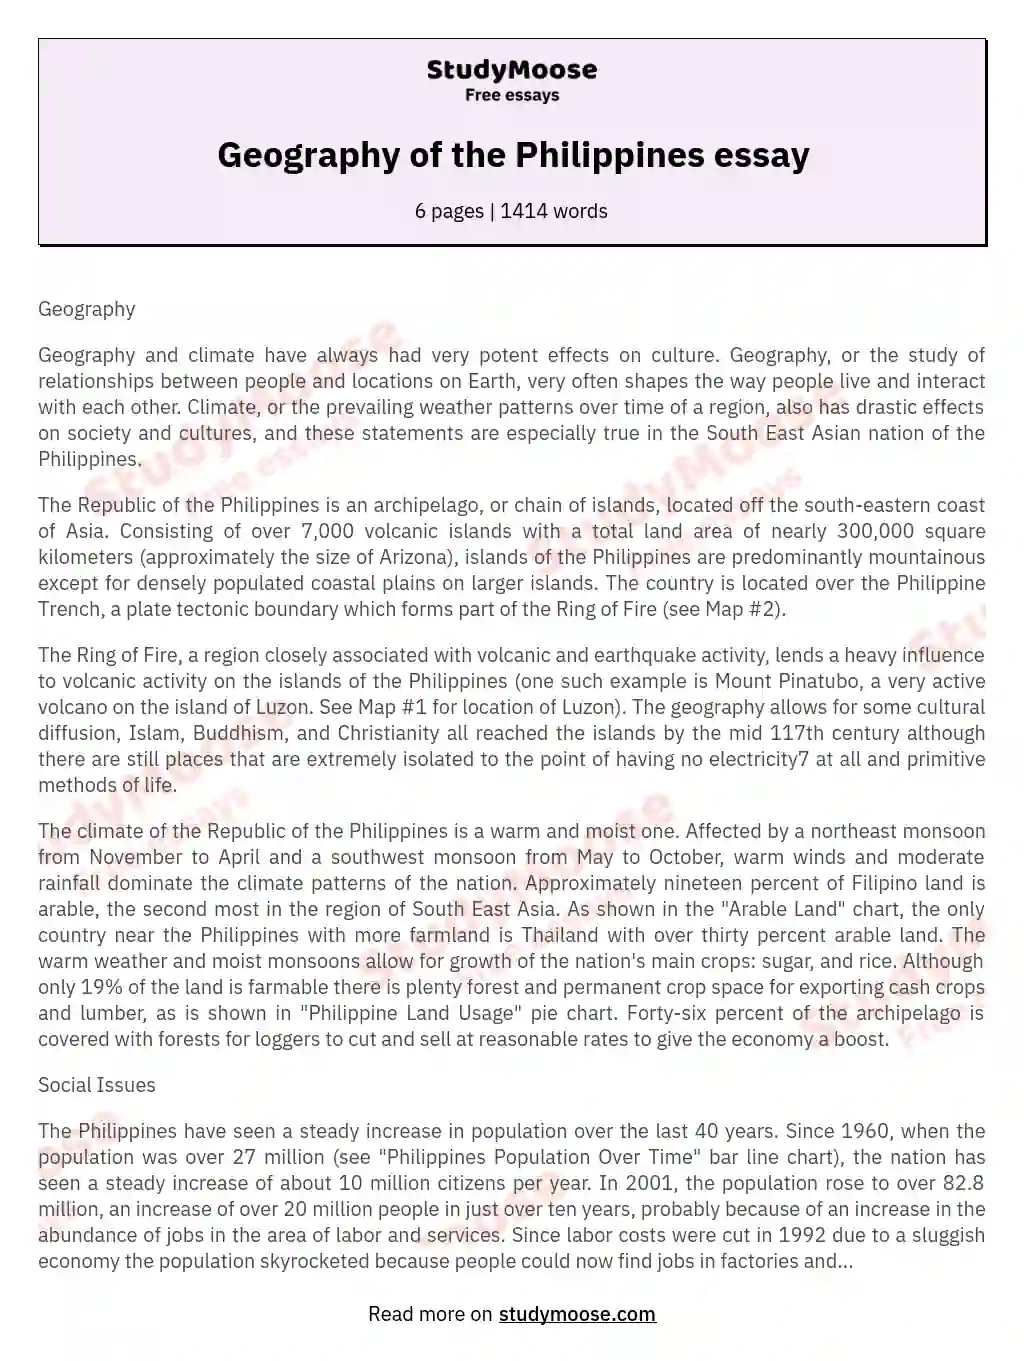 essay meaning in philippines